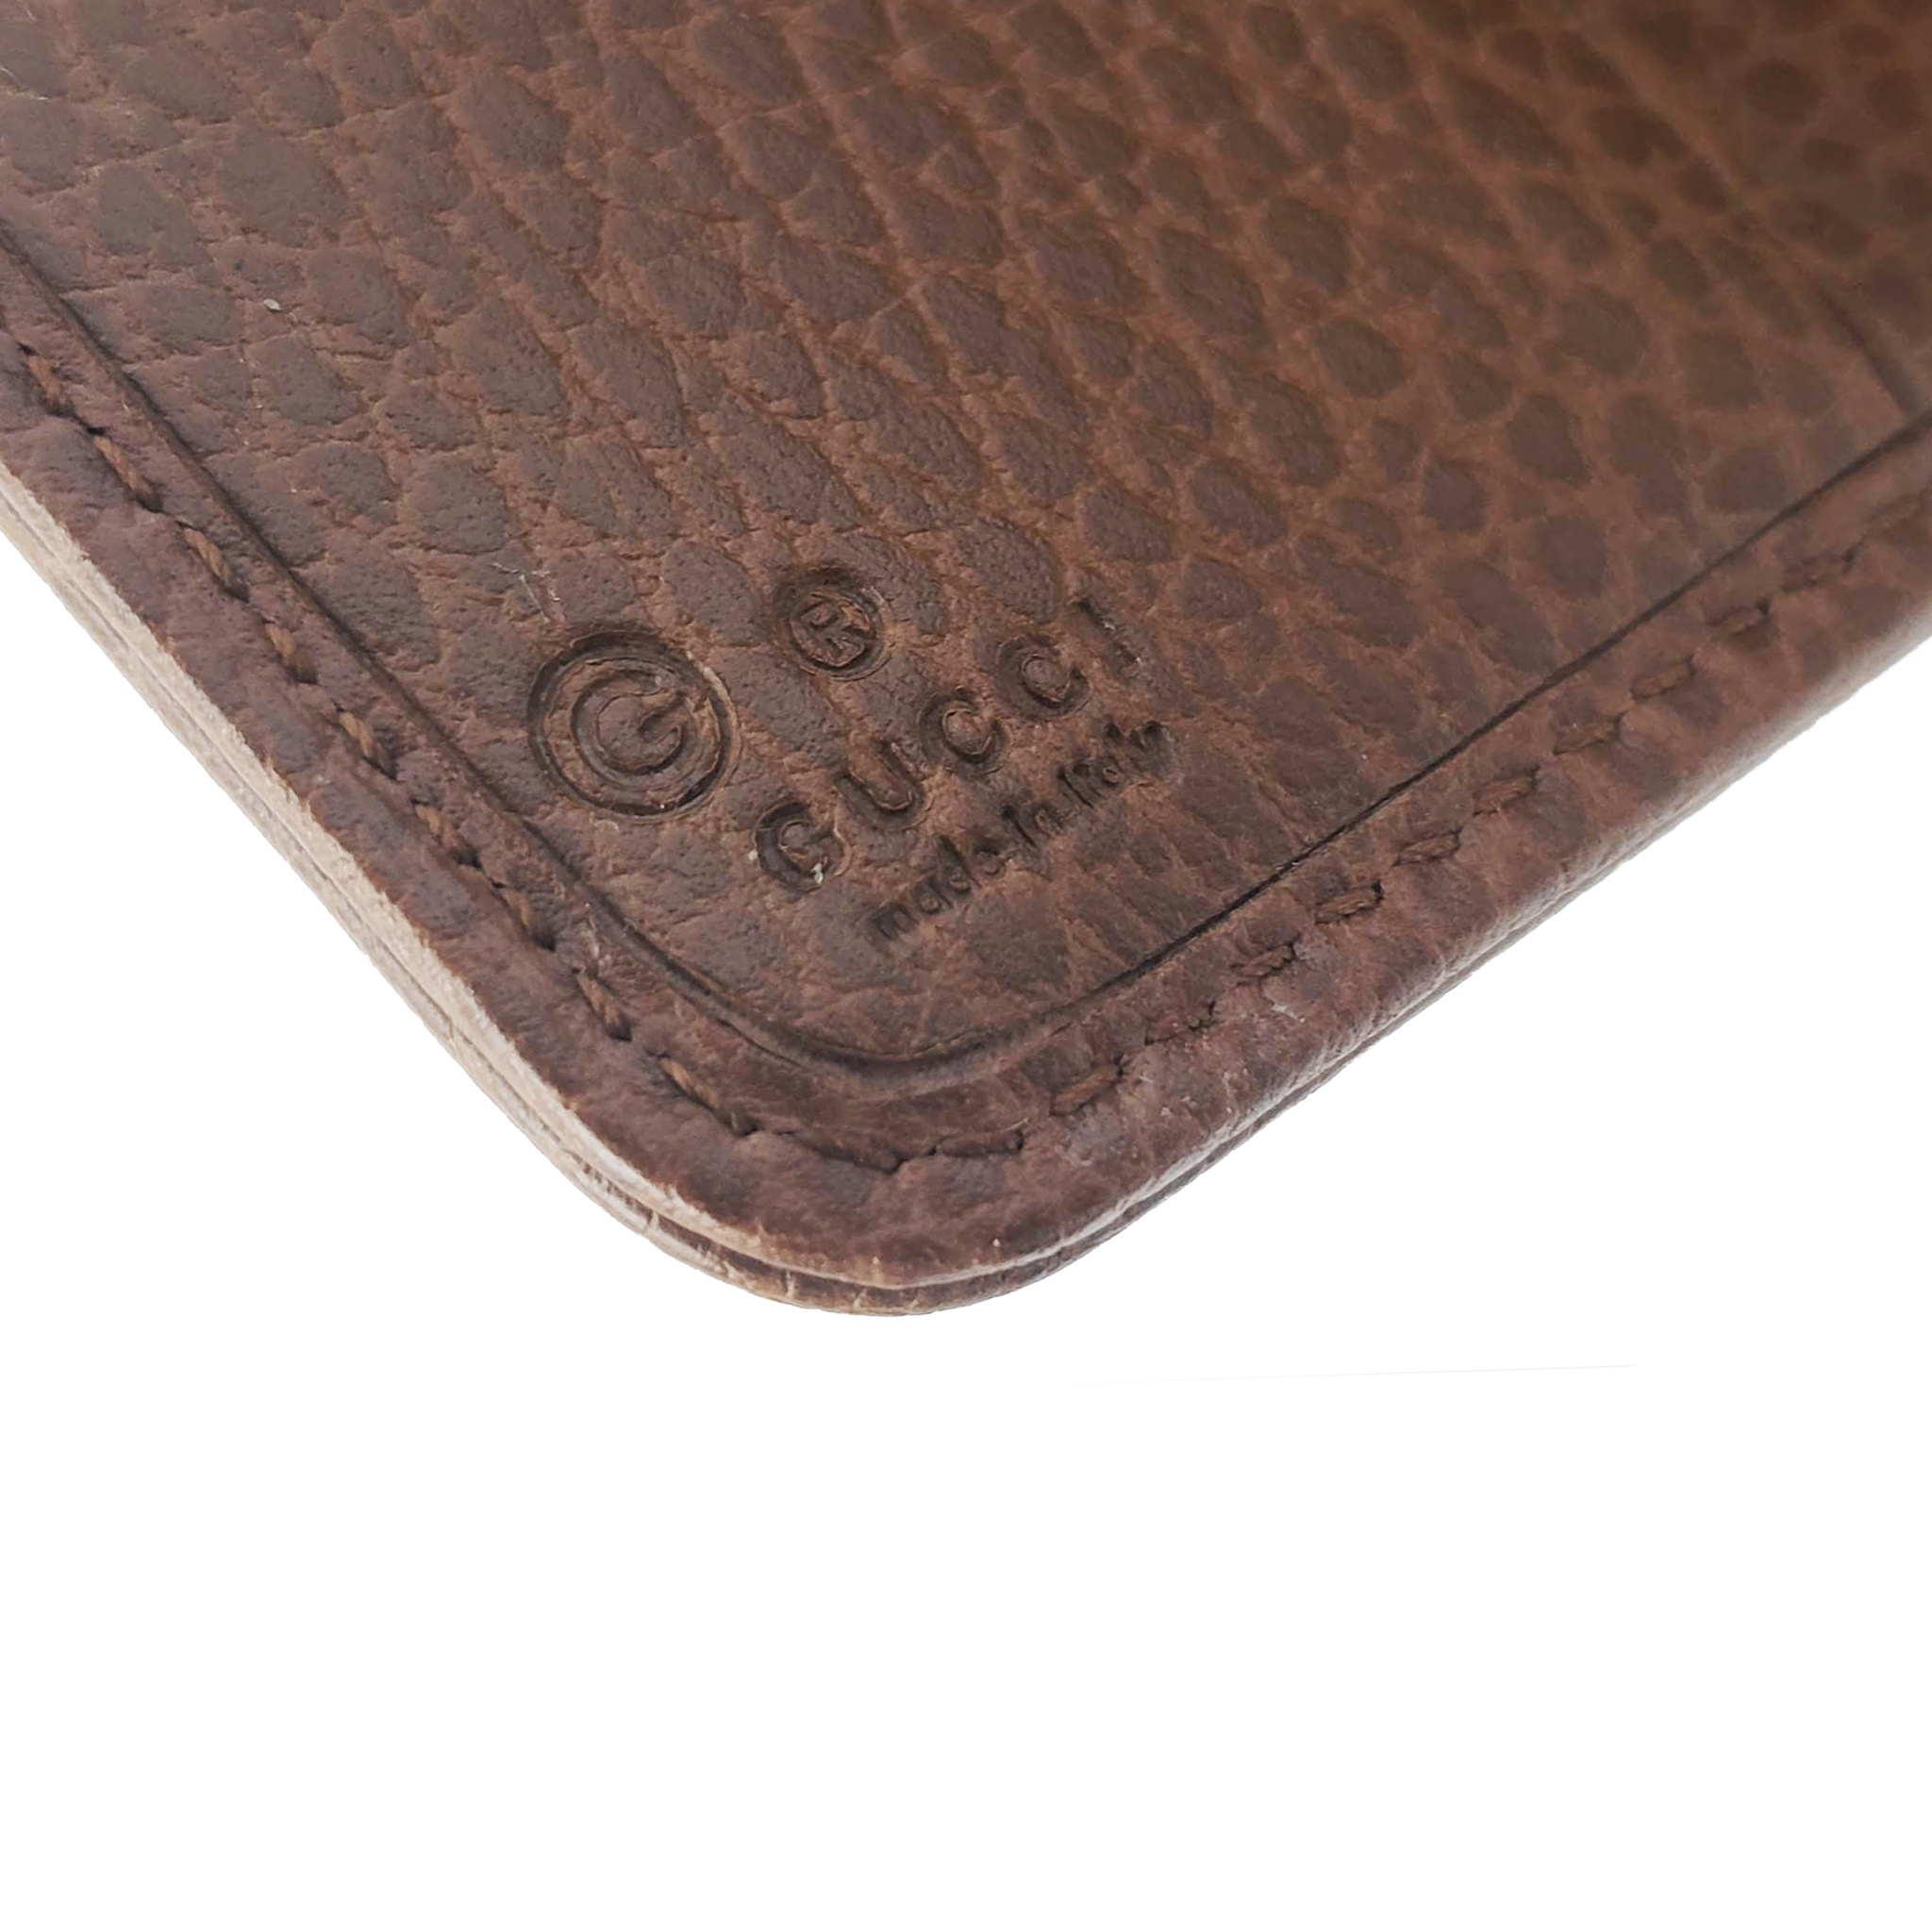 Red Original GG Supreme Canvas French Flap Wallet